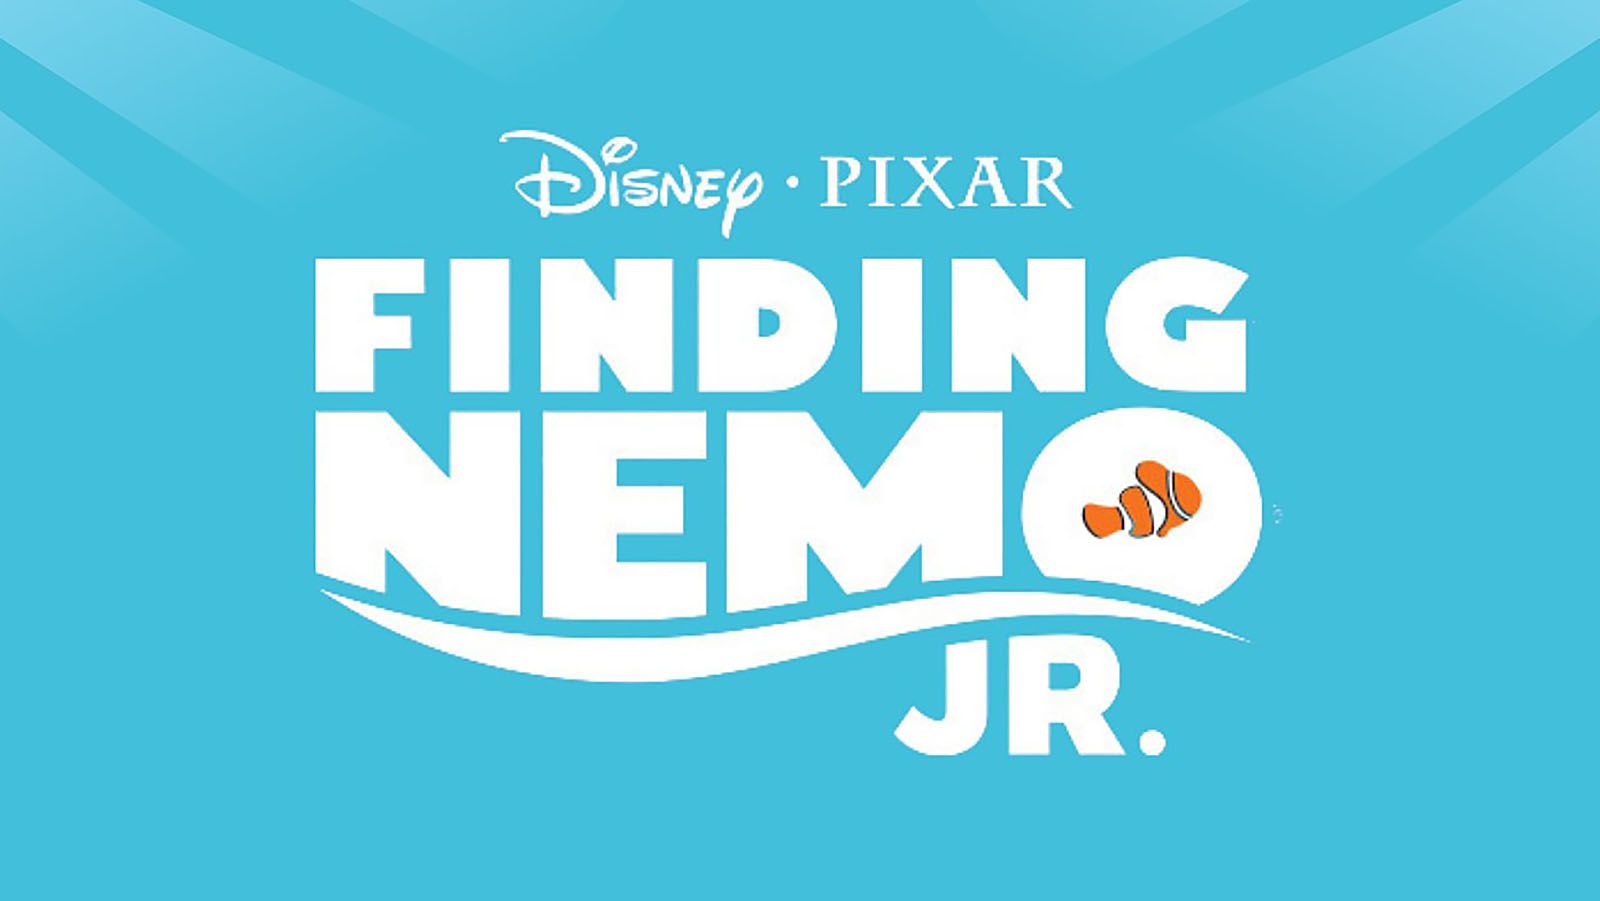 Fire & Light Productions will present "Finding Nemo Jr." at Arts United Center, April 11-13.